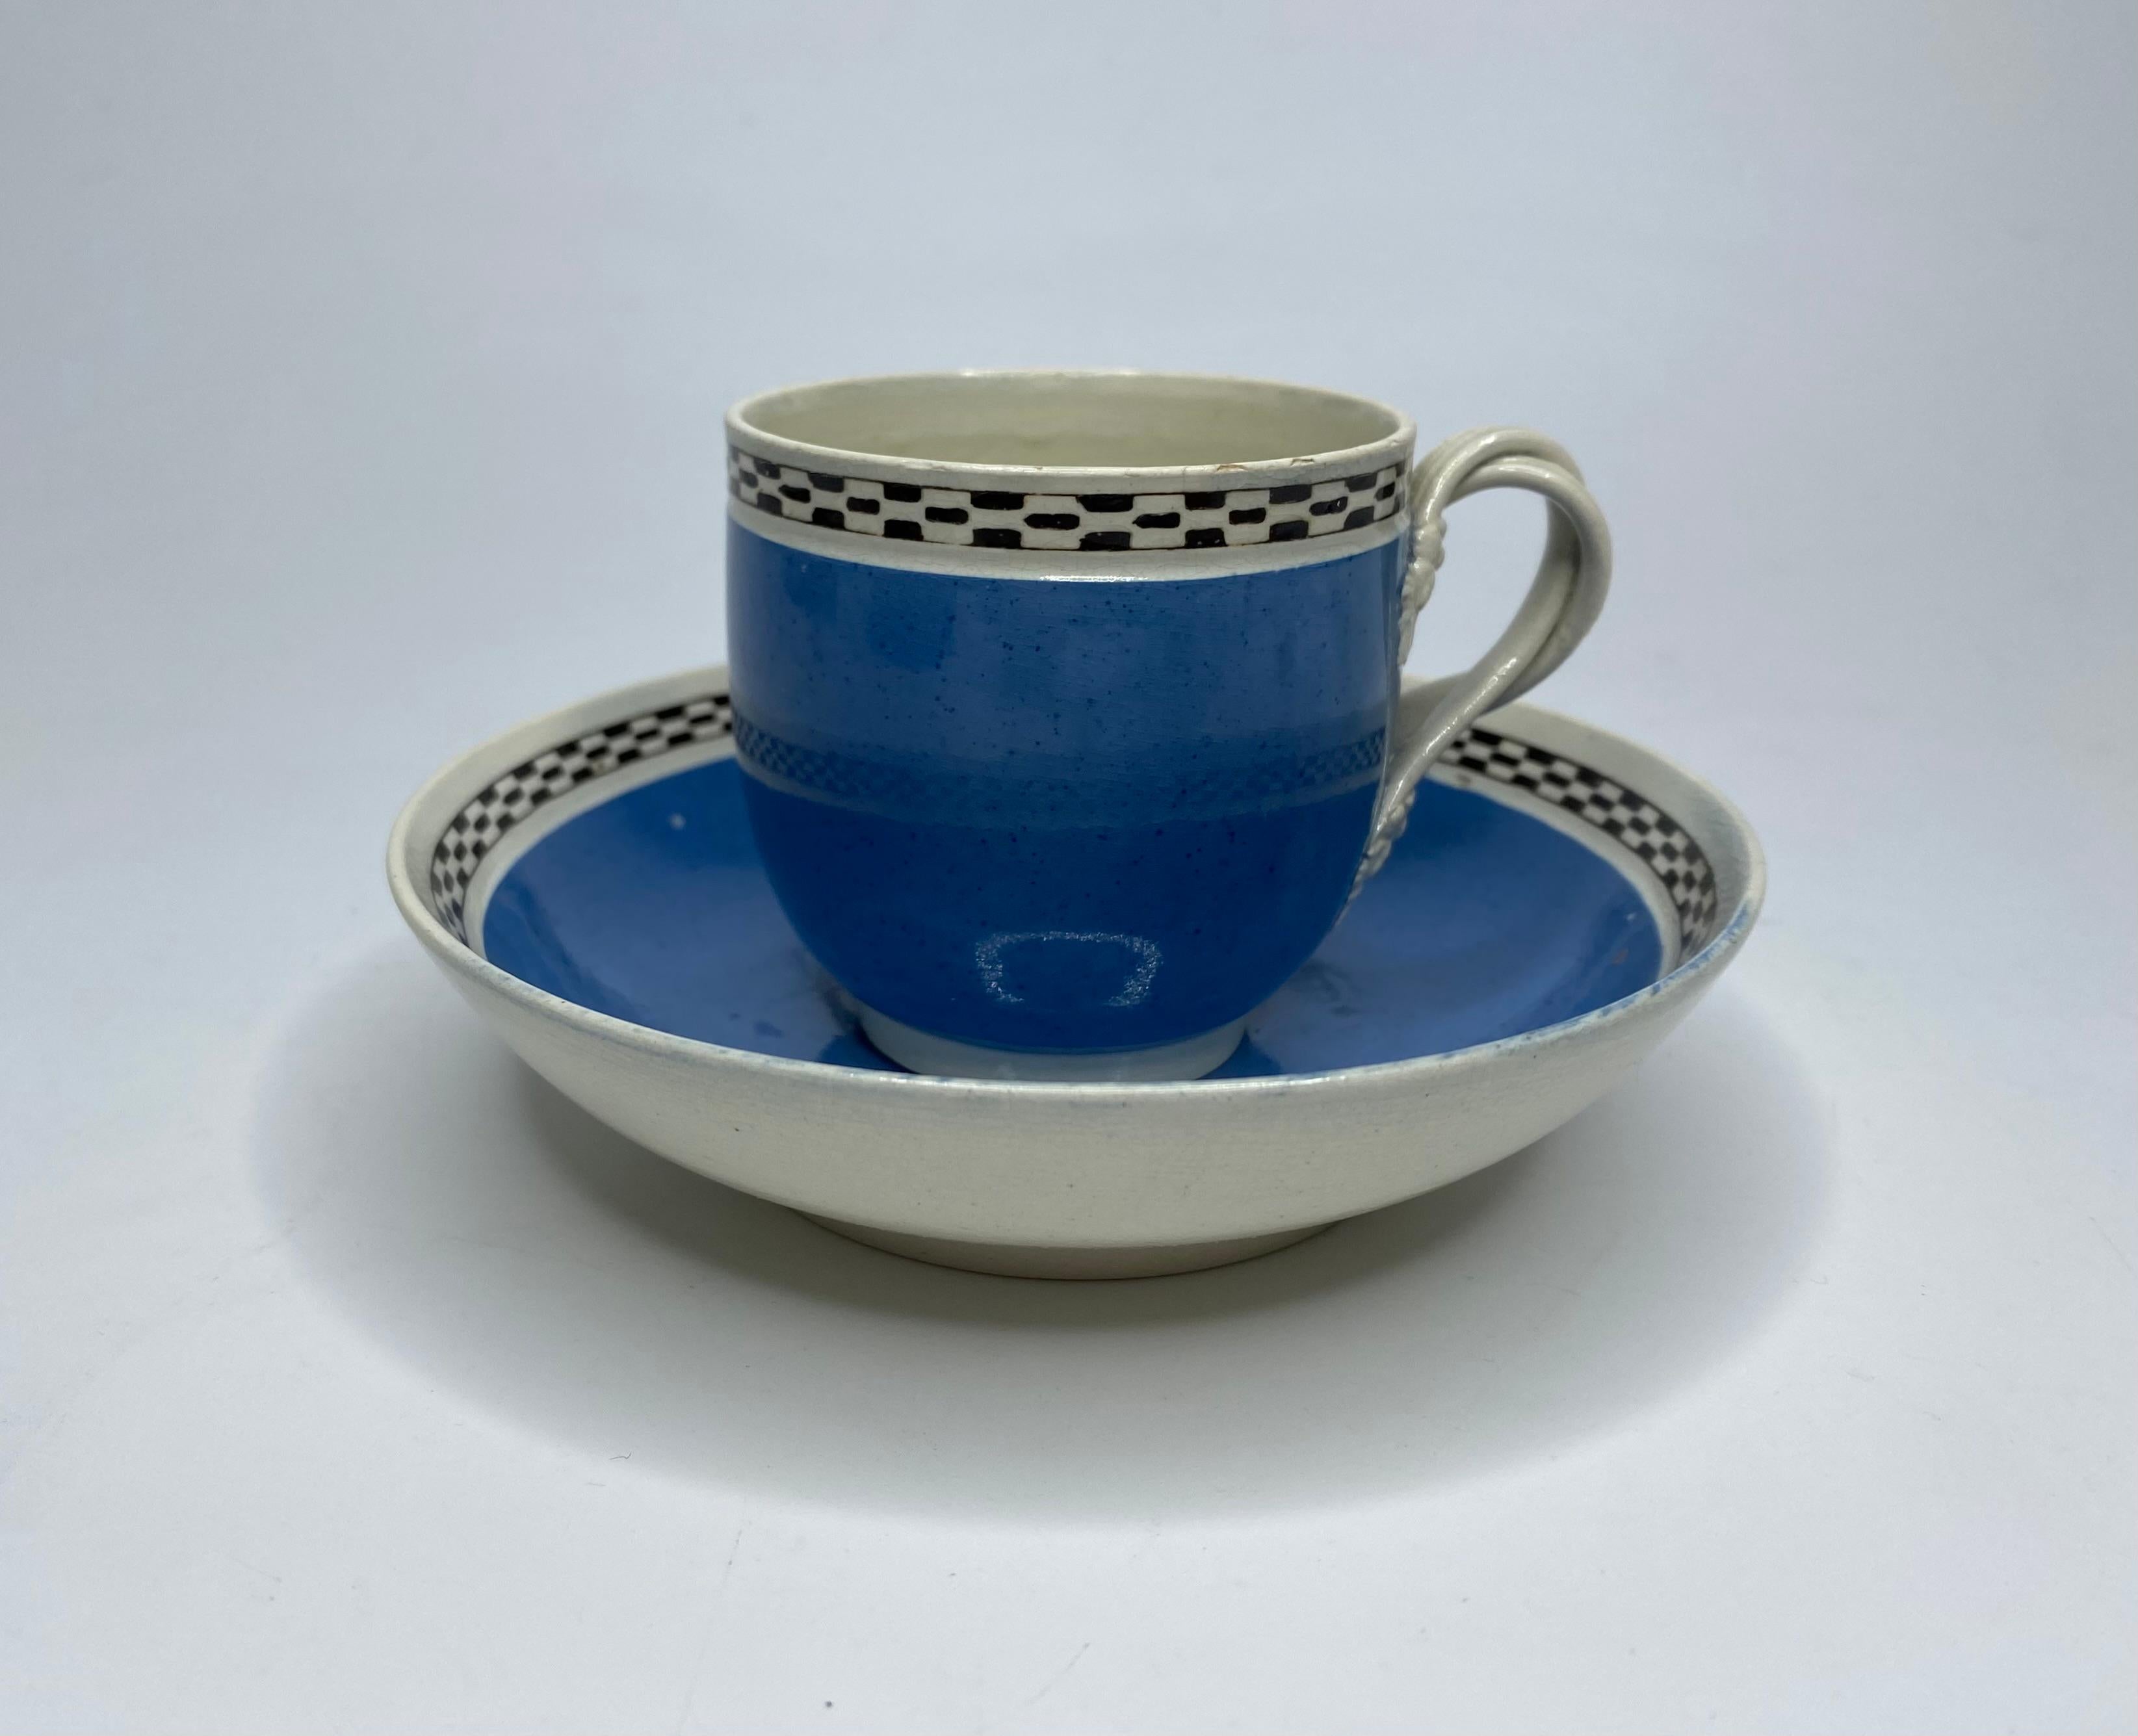 Late 18th Century Leeds Pottery banded cup and saucer, c. 1790. For Sale